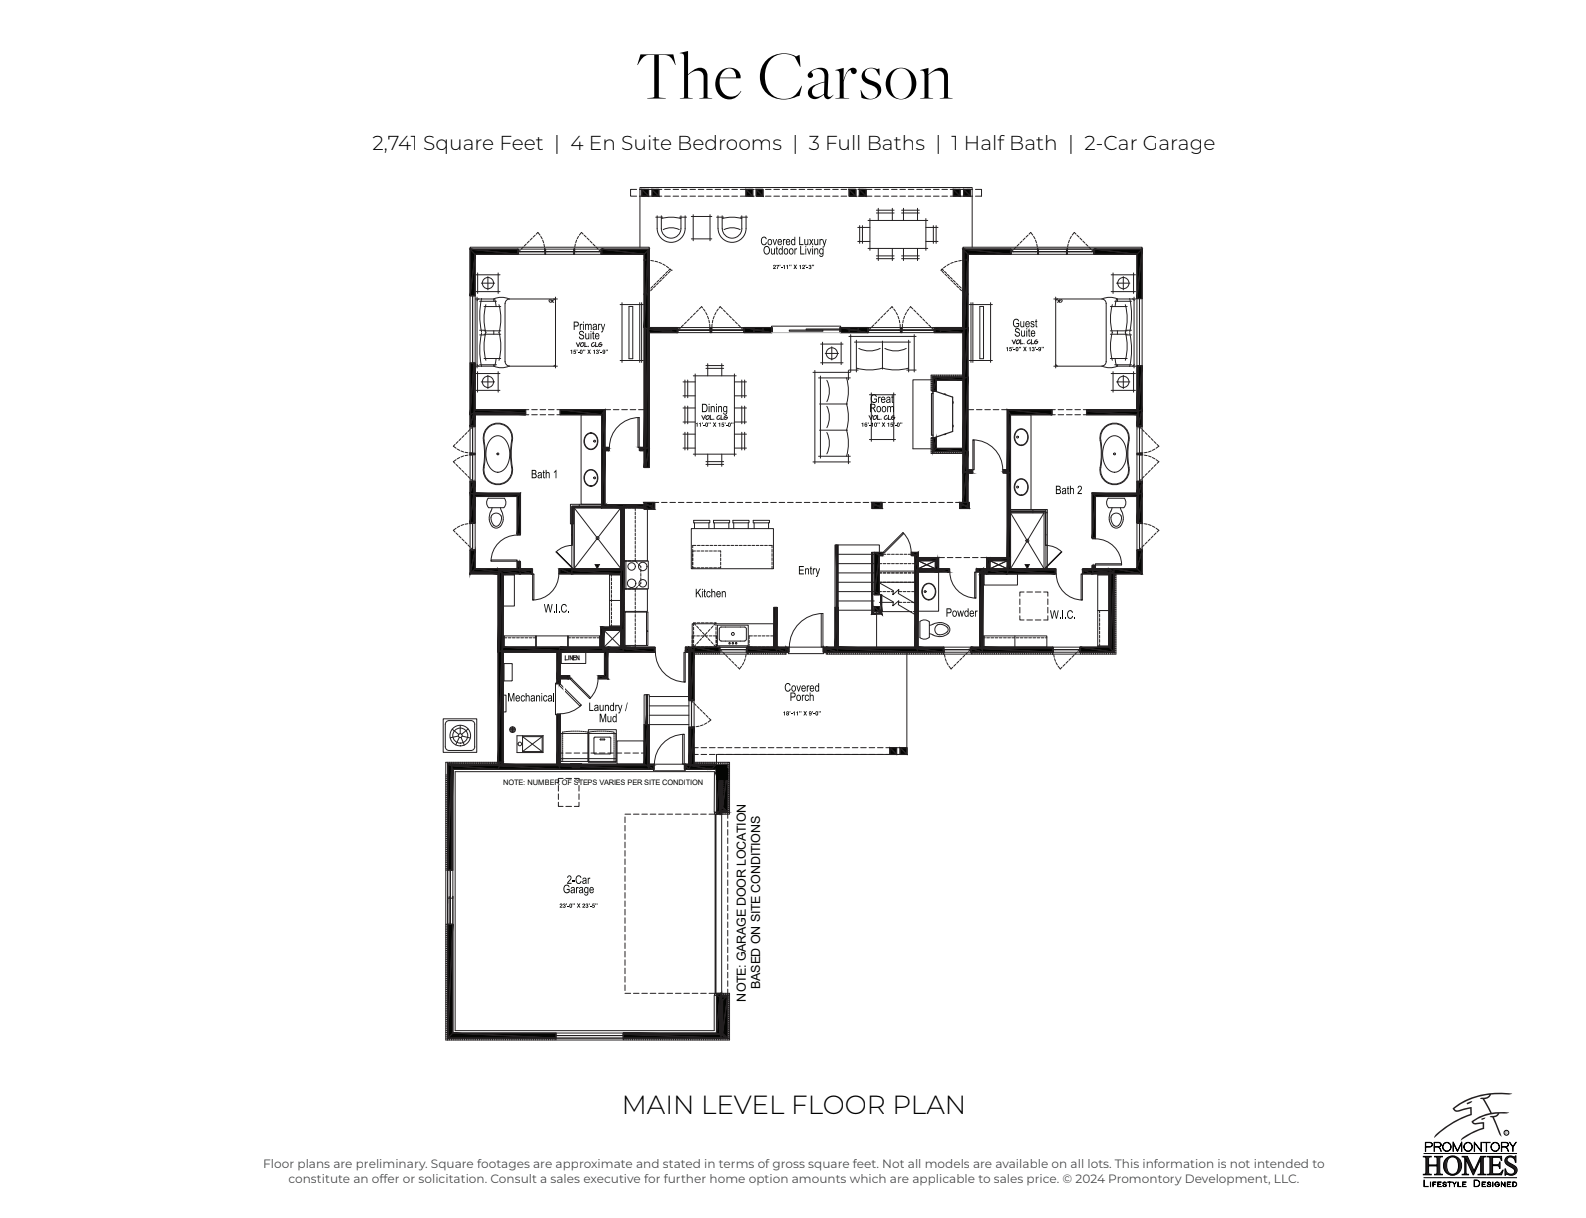 Promontory homes - The Carson